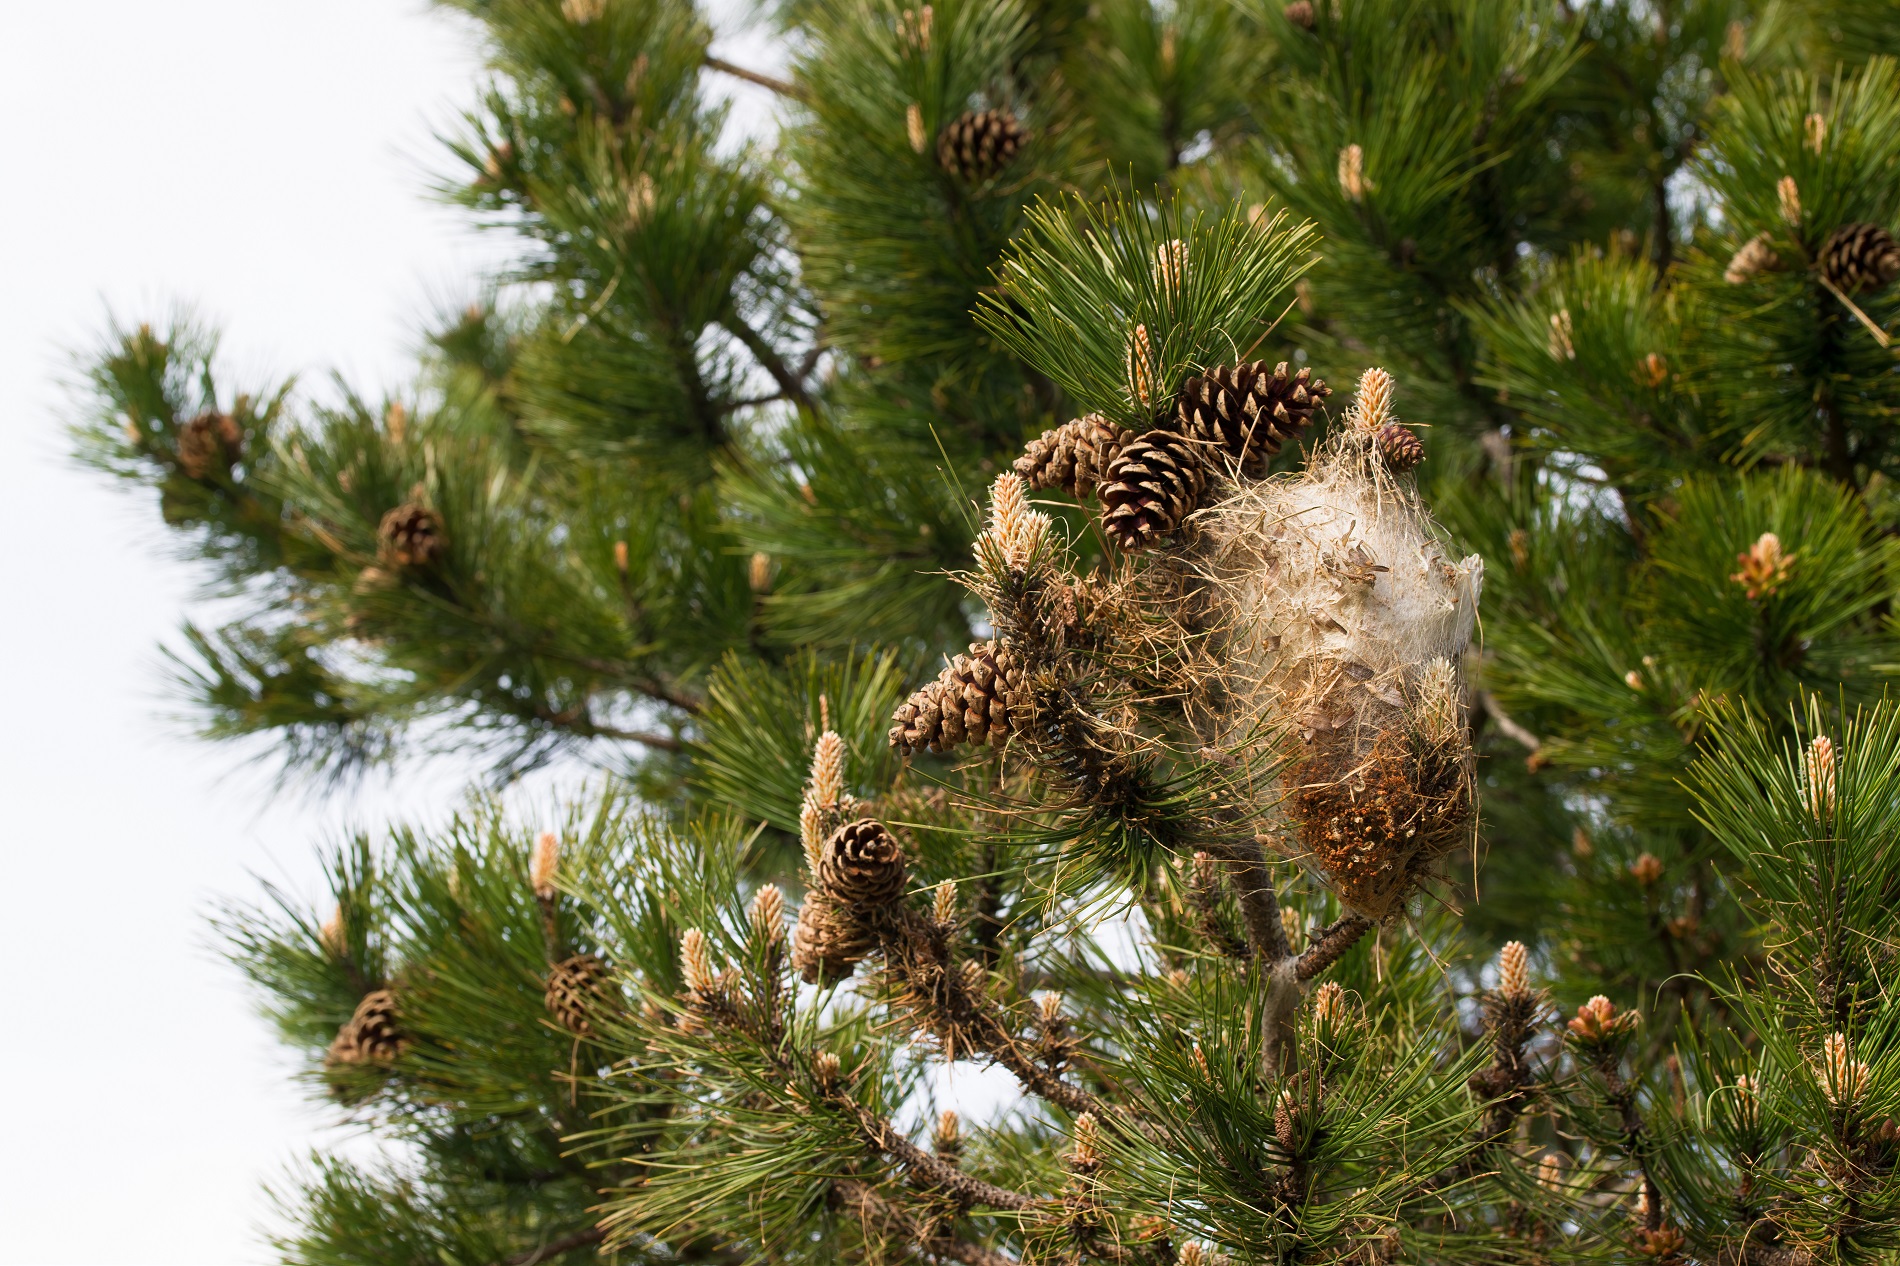 Cocoon nest of pine processionary caterpillars in a pine tree